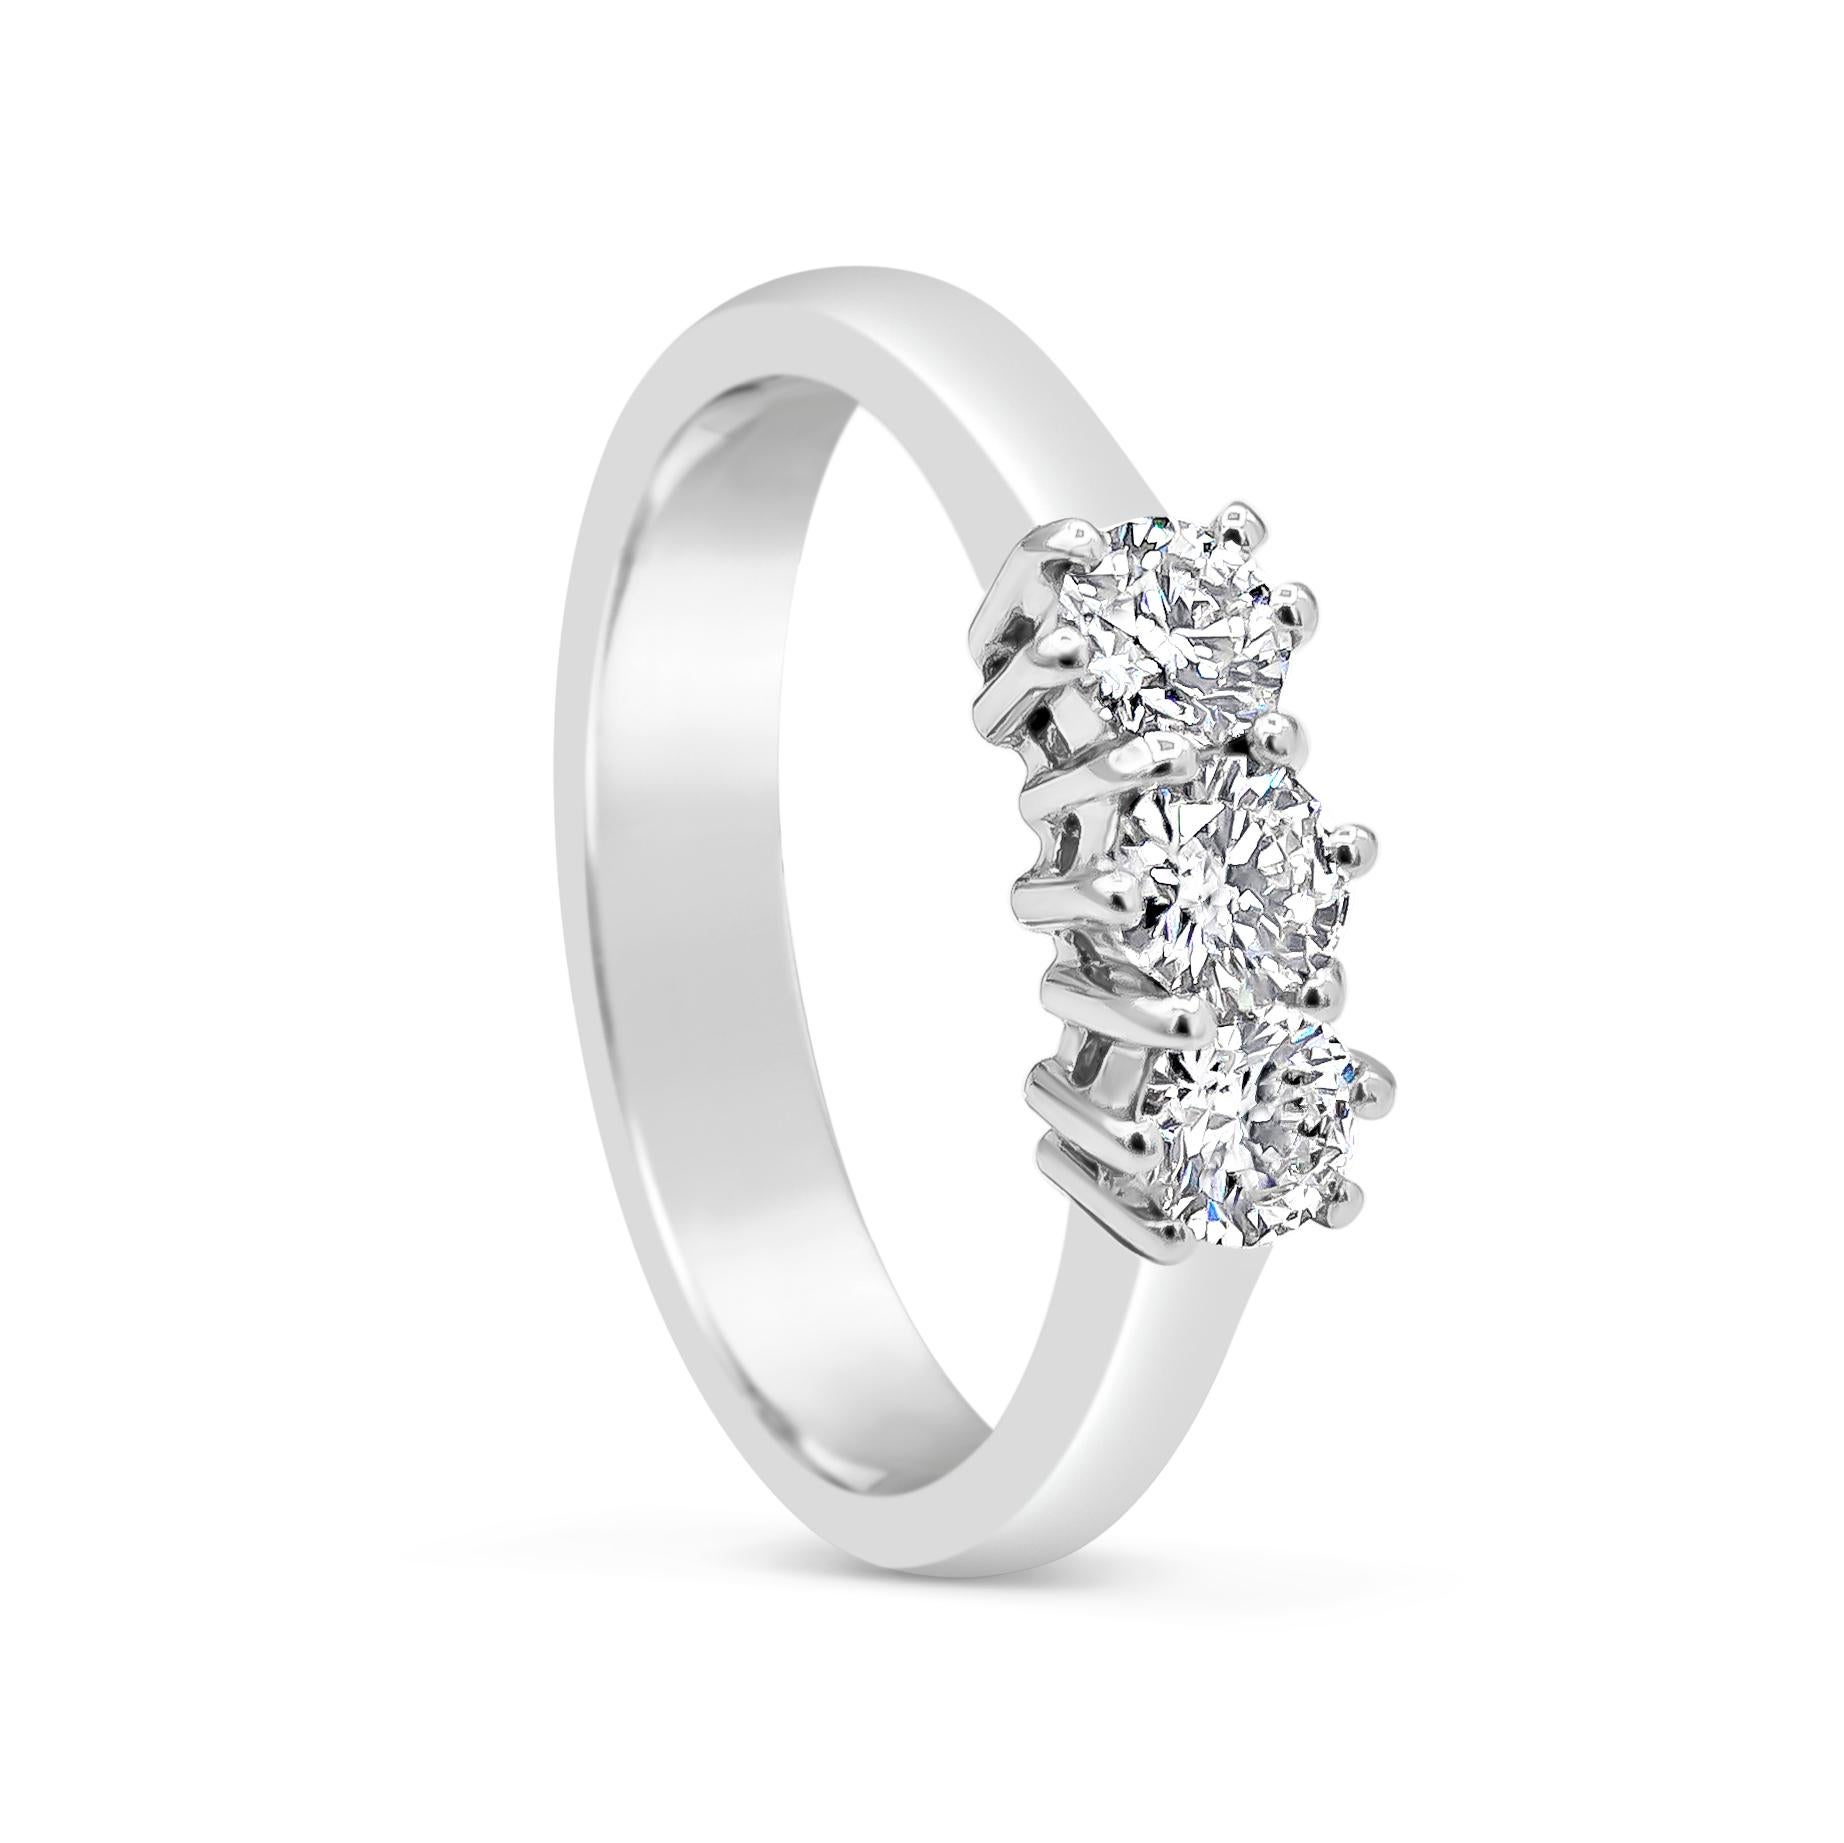 A classy and simple engagement ring style showcasing three brilliant diamonds, set in a timeless six-prong white gold setting. Diamonds weigh 0.58 carats total and are approximately G color, VS in clarity. Size 5.75 US resizable upon request.

Style